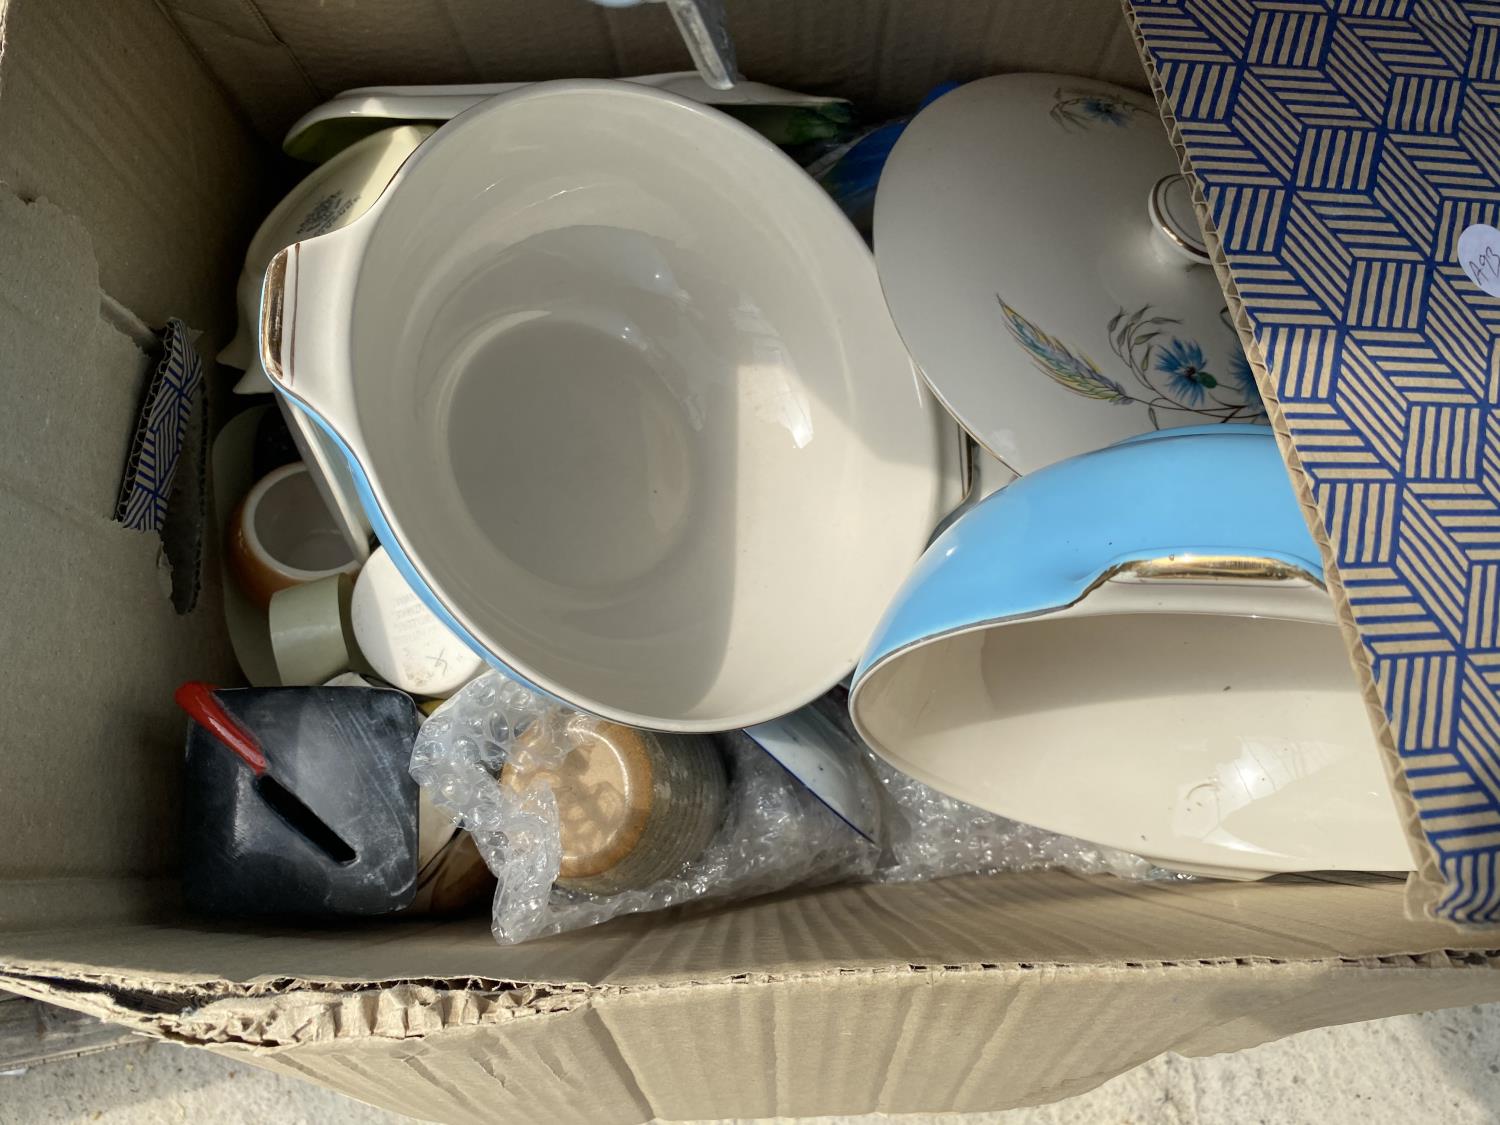 AN ASSORTMENT OF HOUSEHOLD CLEARANCE ITEMS TO INCLUDE CERAMIC WARE, LAMPSHADES AND RECORDS ETC - Image 4 of 6